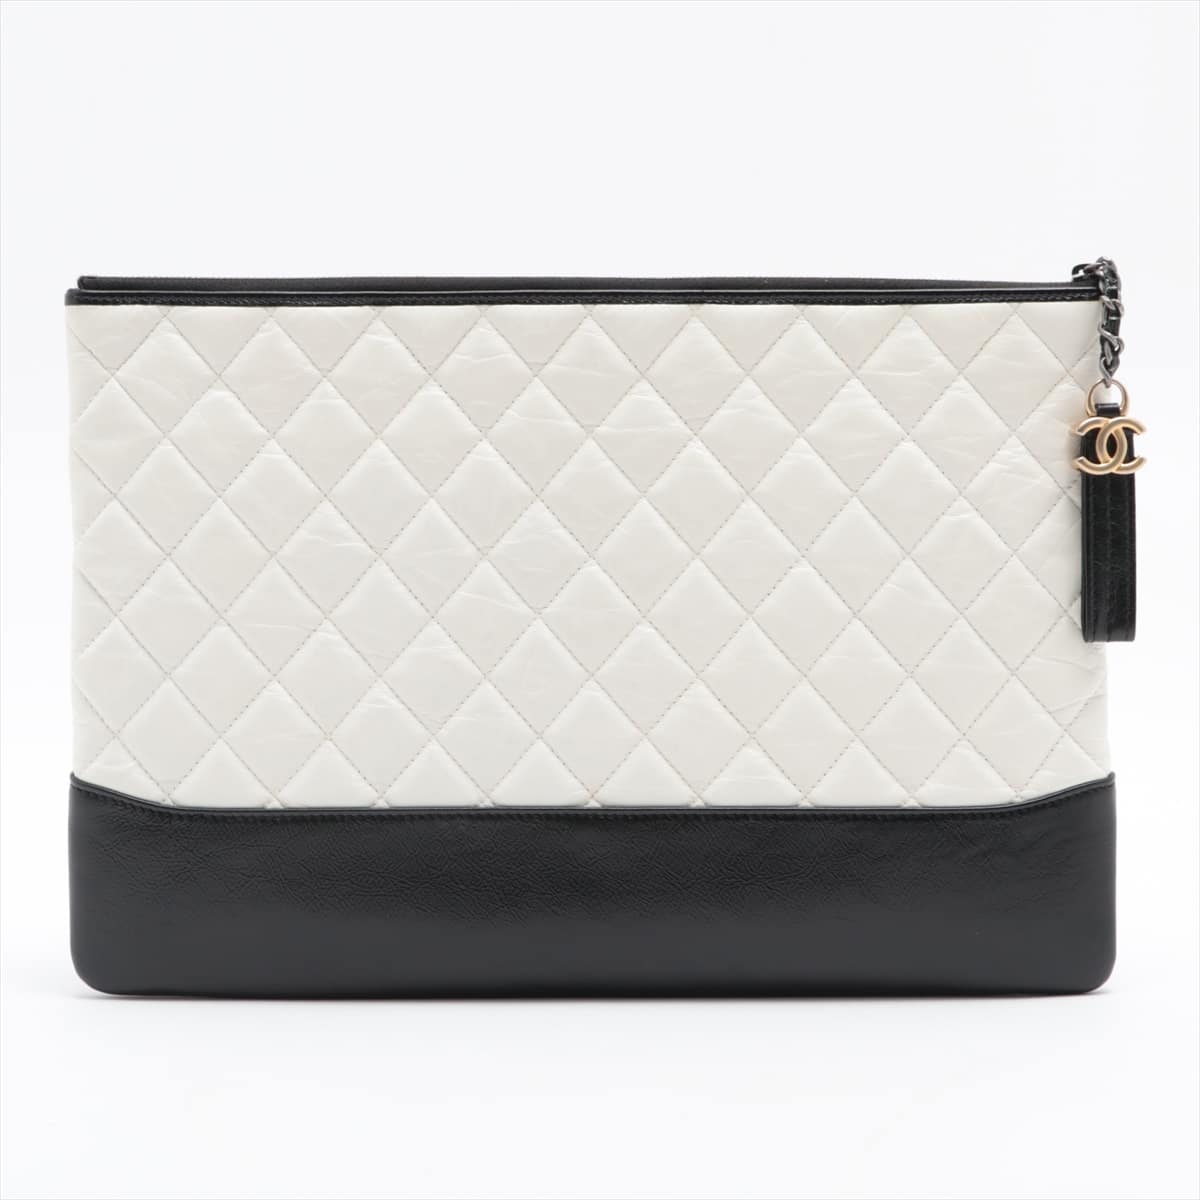 Chanel Gabrielle Doo Chanel Leather Clutch bag Black × White Gold x silver metal fittings 25XXXXXX